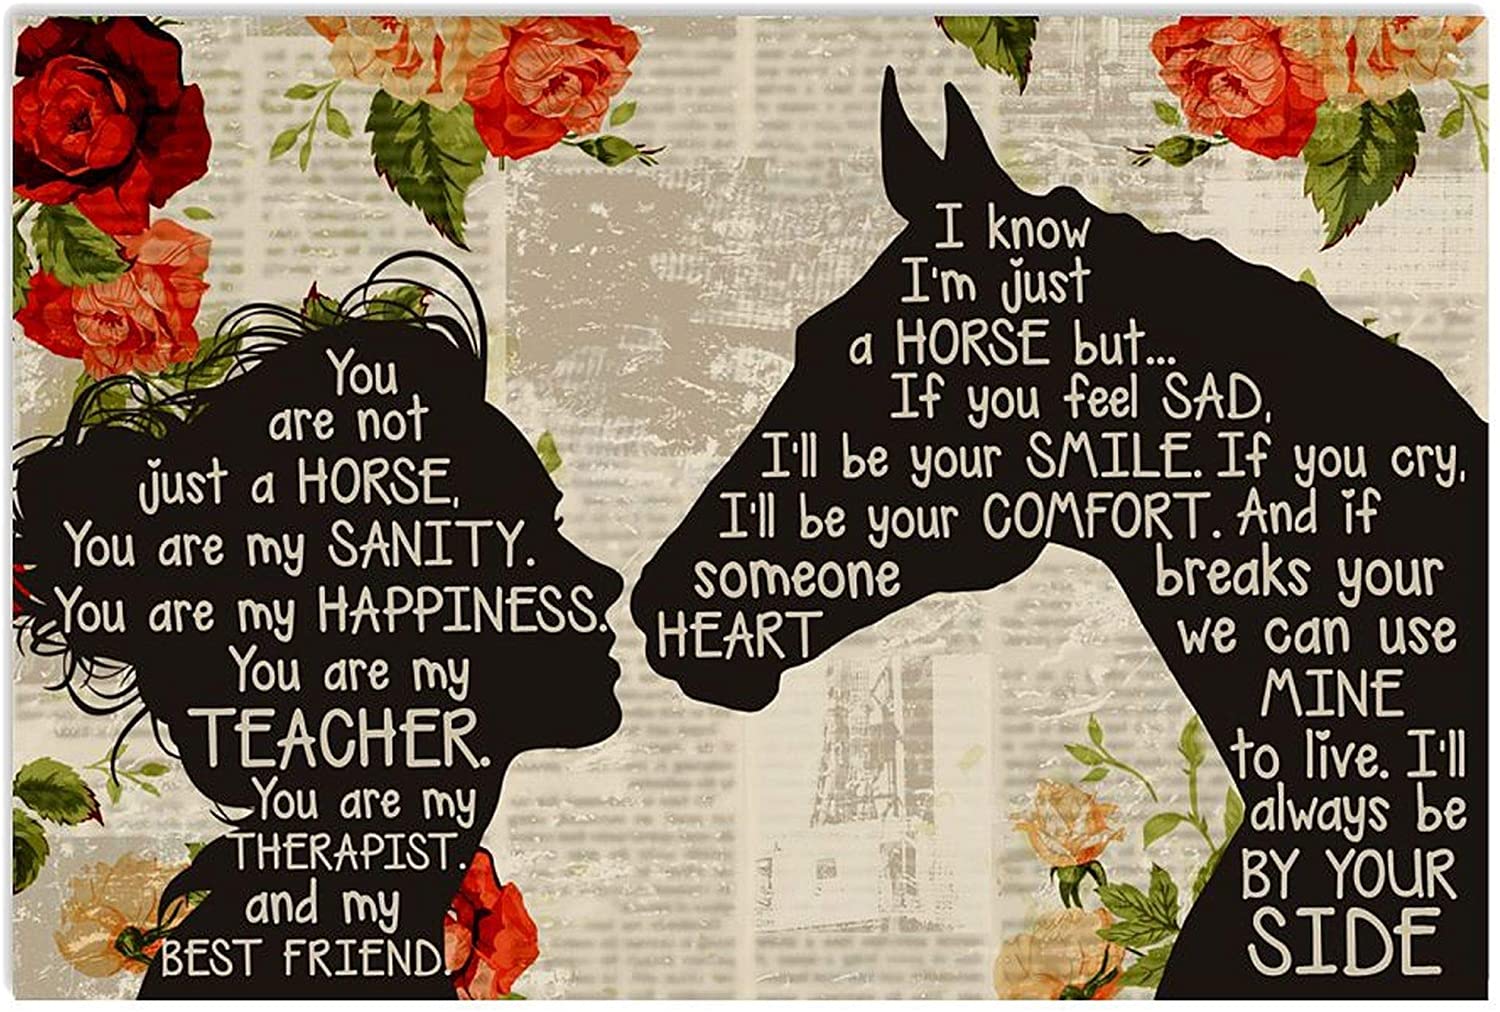 You are Not Just A Horse You are My Sanity Happiness Teacher Therapist Poster